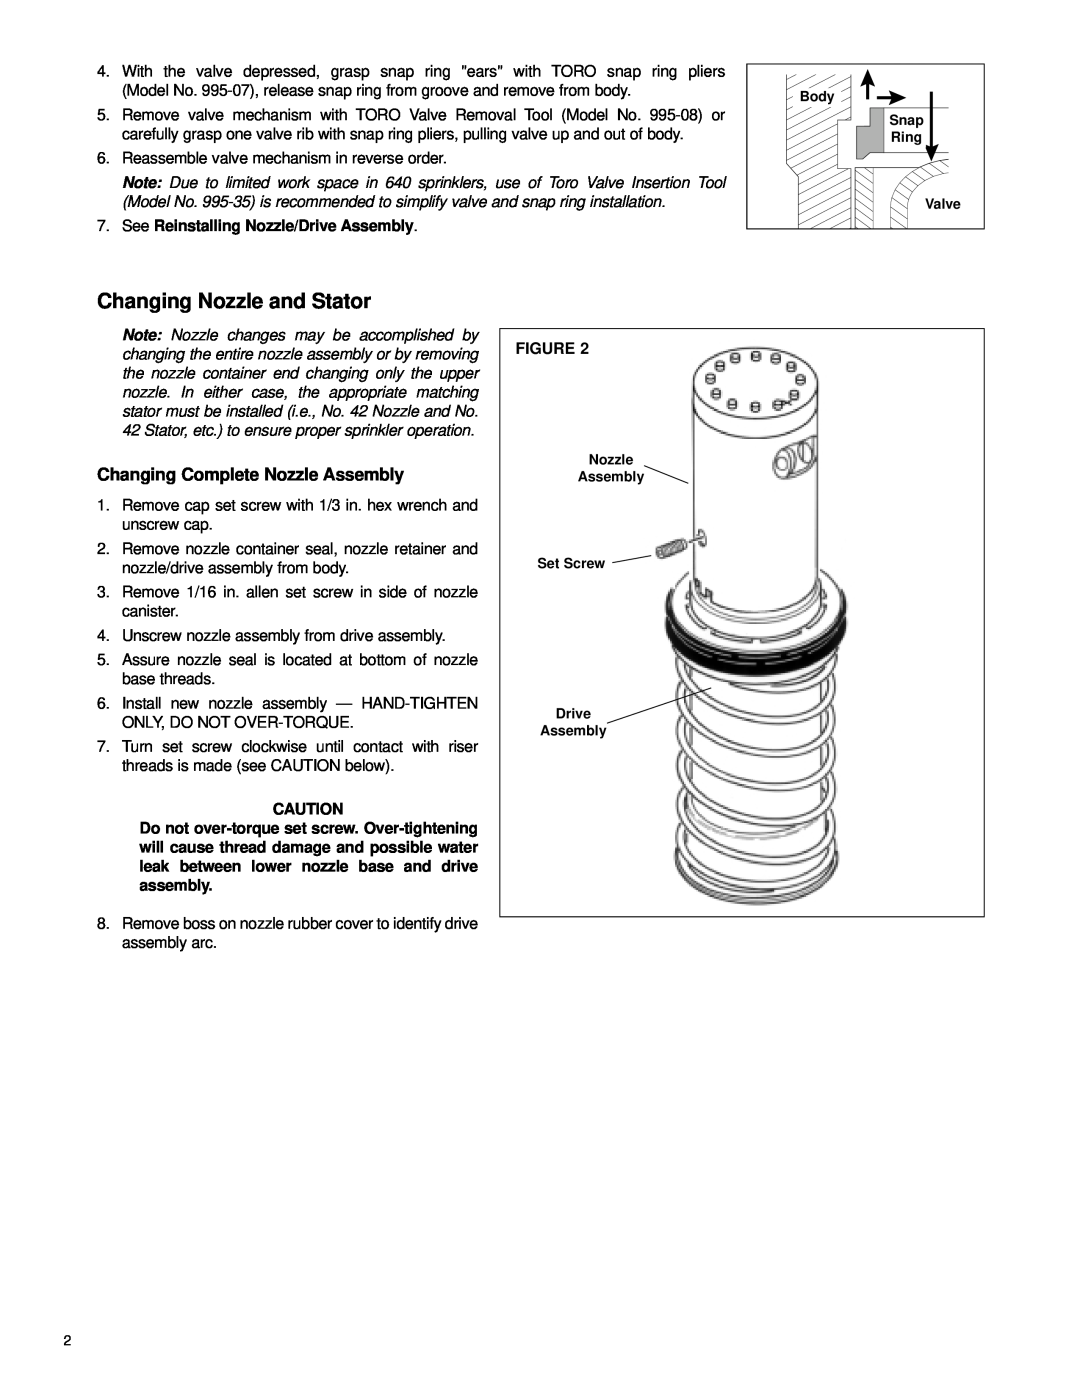 Toro 640 manual Changing Nozzle and Stator, Changing Complete Nozzle Assembly, See Reinstalling Nozzle/Drive Assembly 